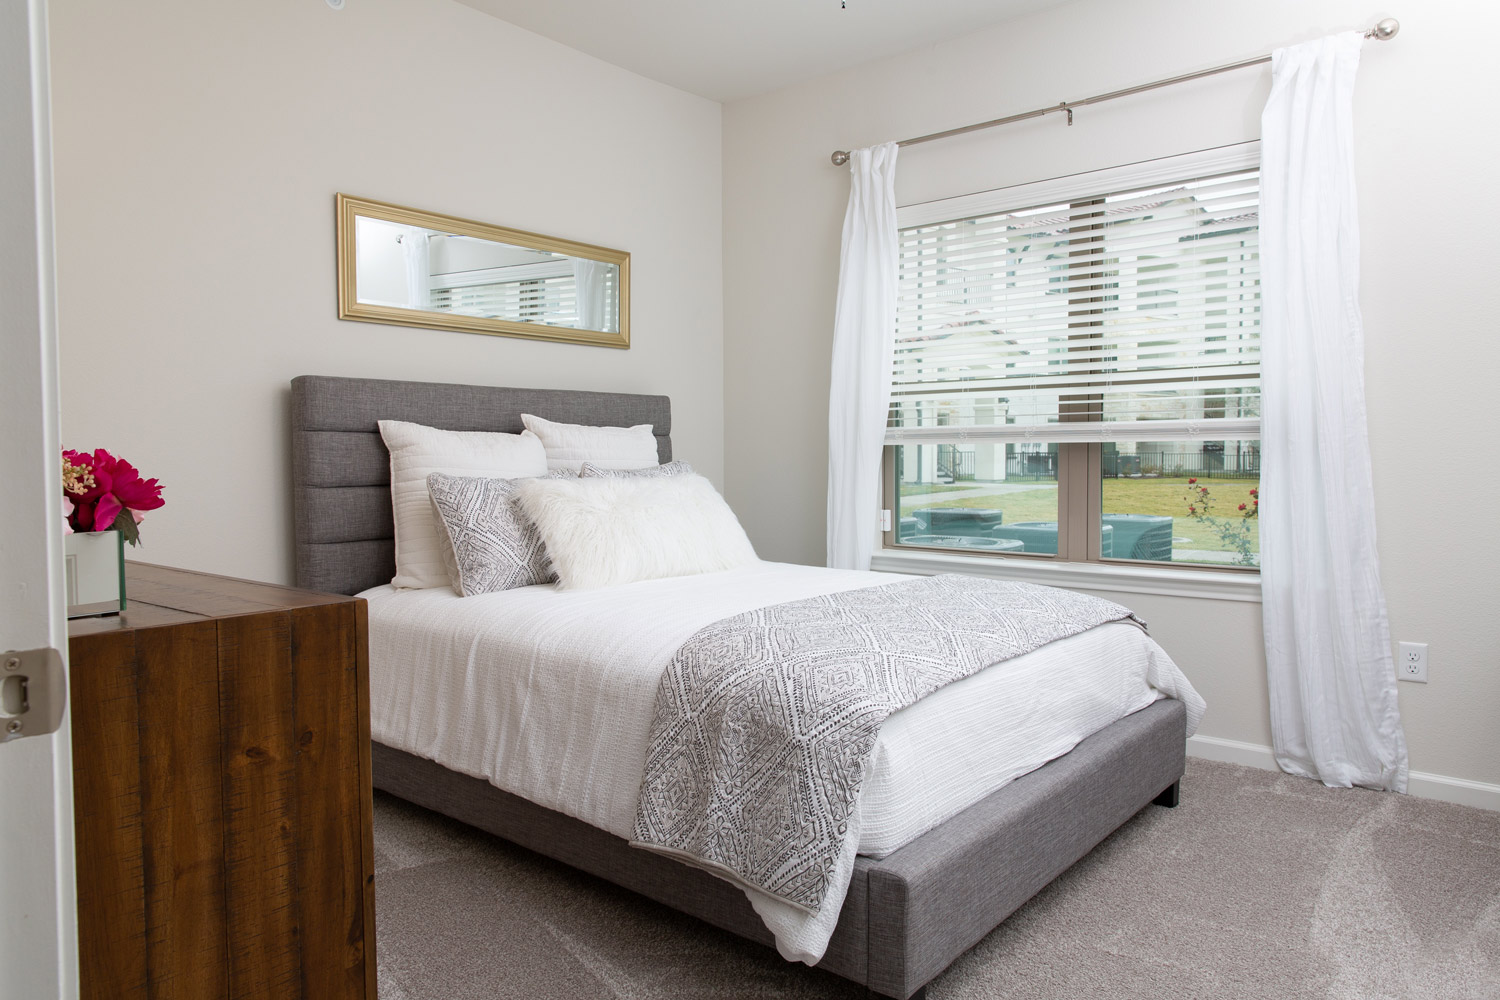 Updated White Bedroom Interiors at Oxford at Santa Clara Apartments in Pflugerville, Texas